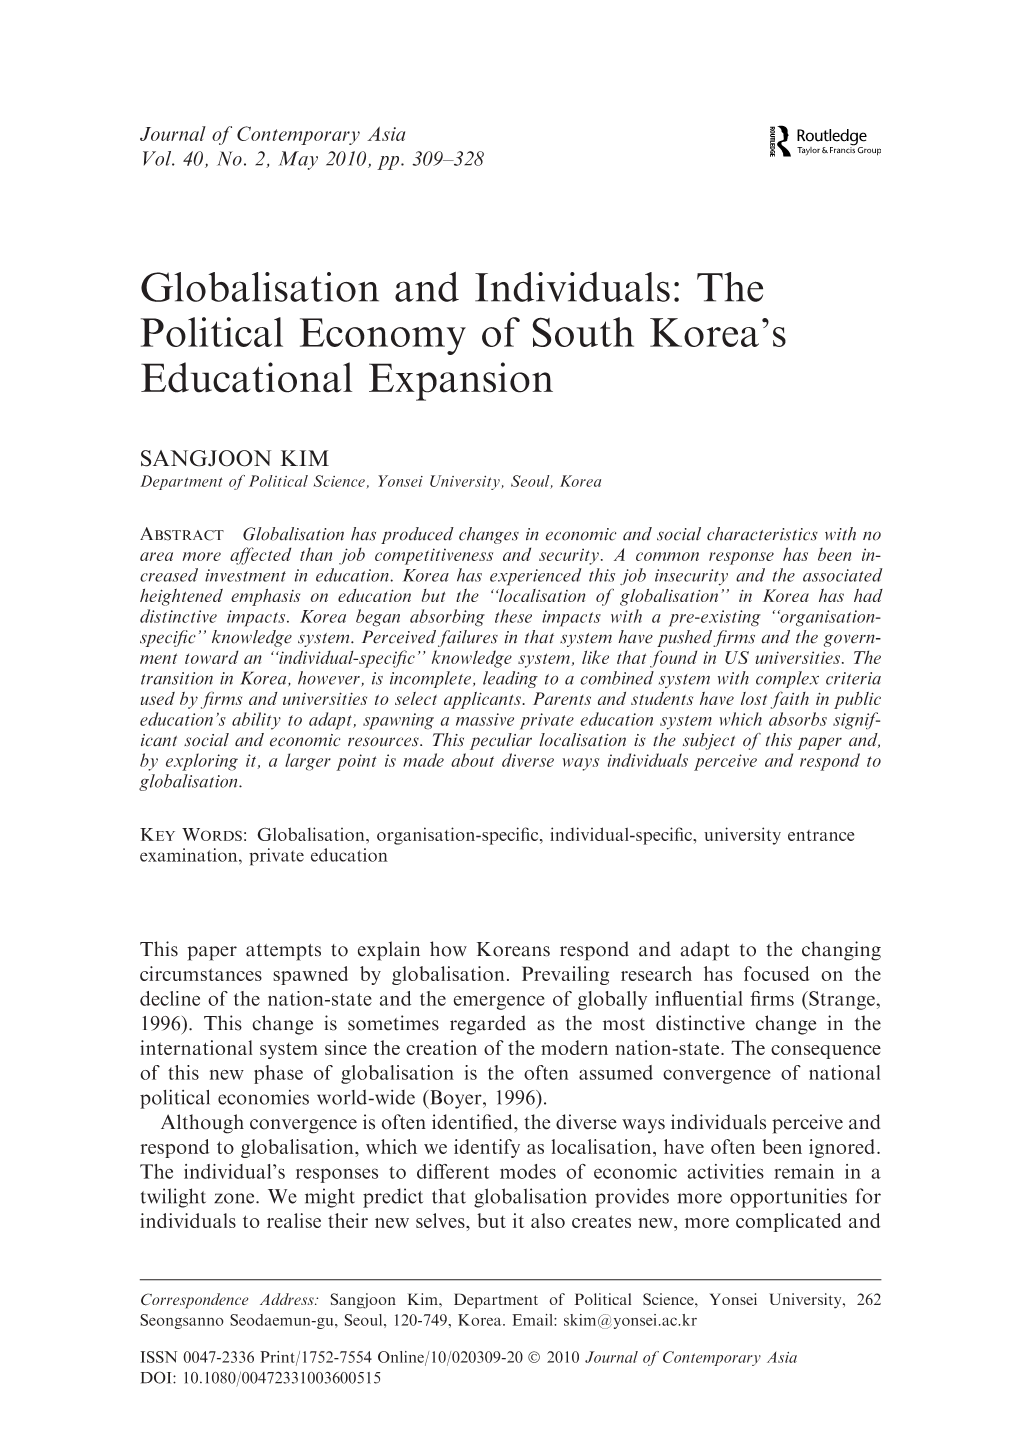 Globalisation and Individuals: the Political Economy of South Korea's